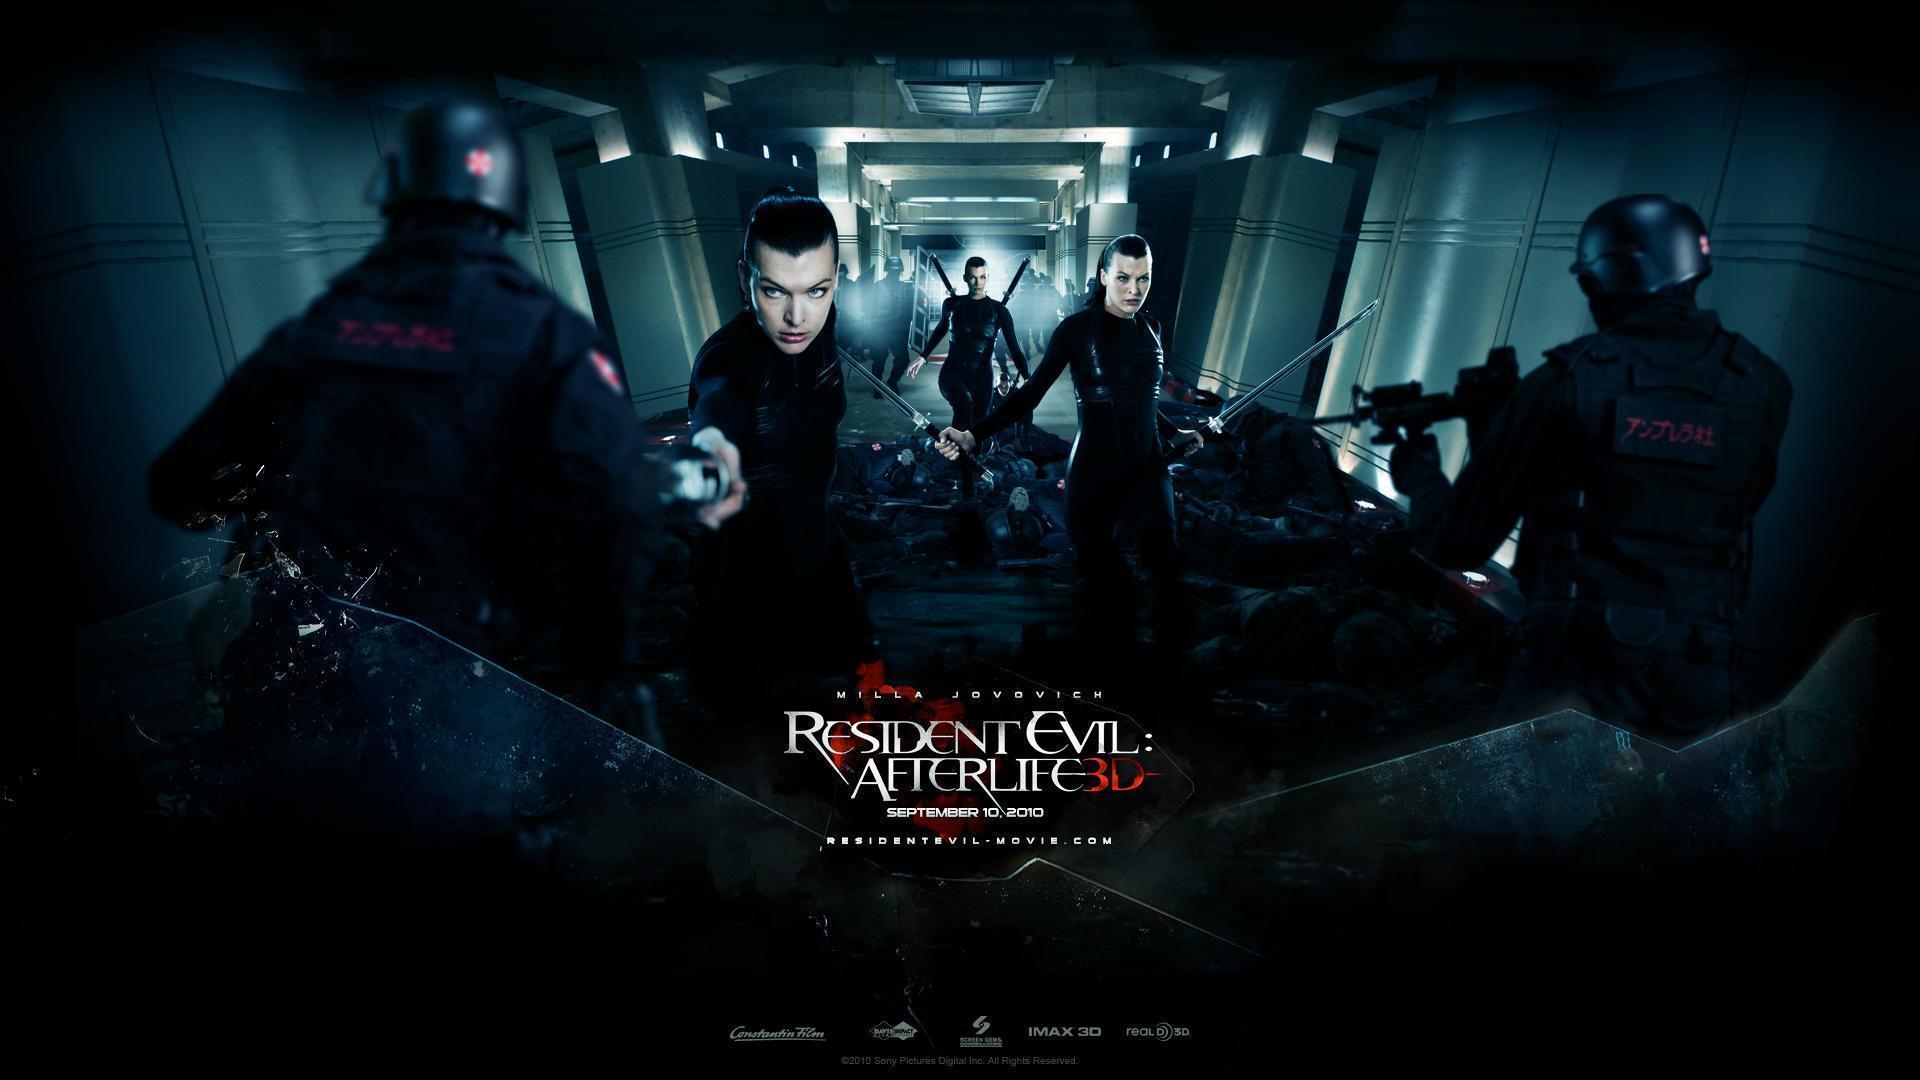 Resident evil wallpapers hd